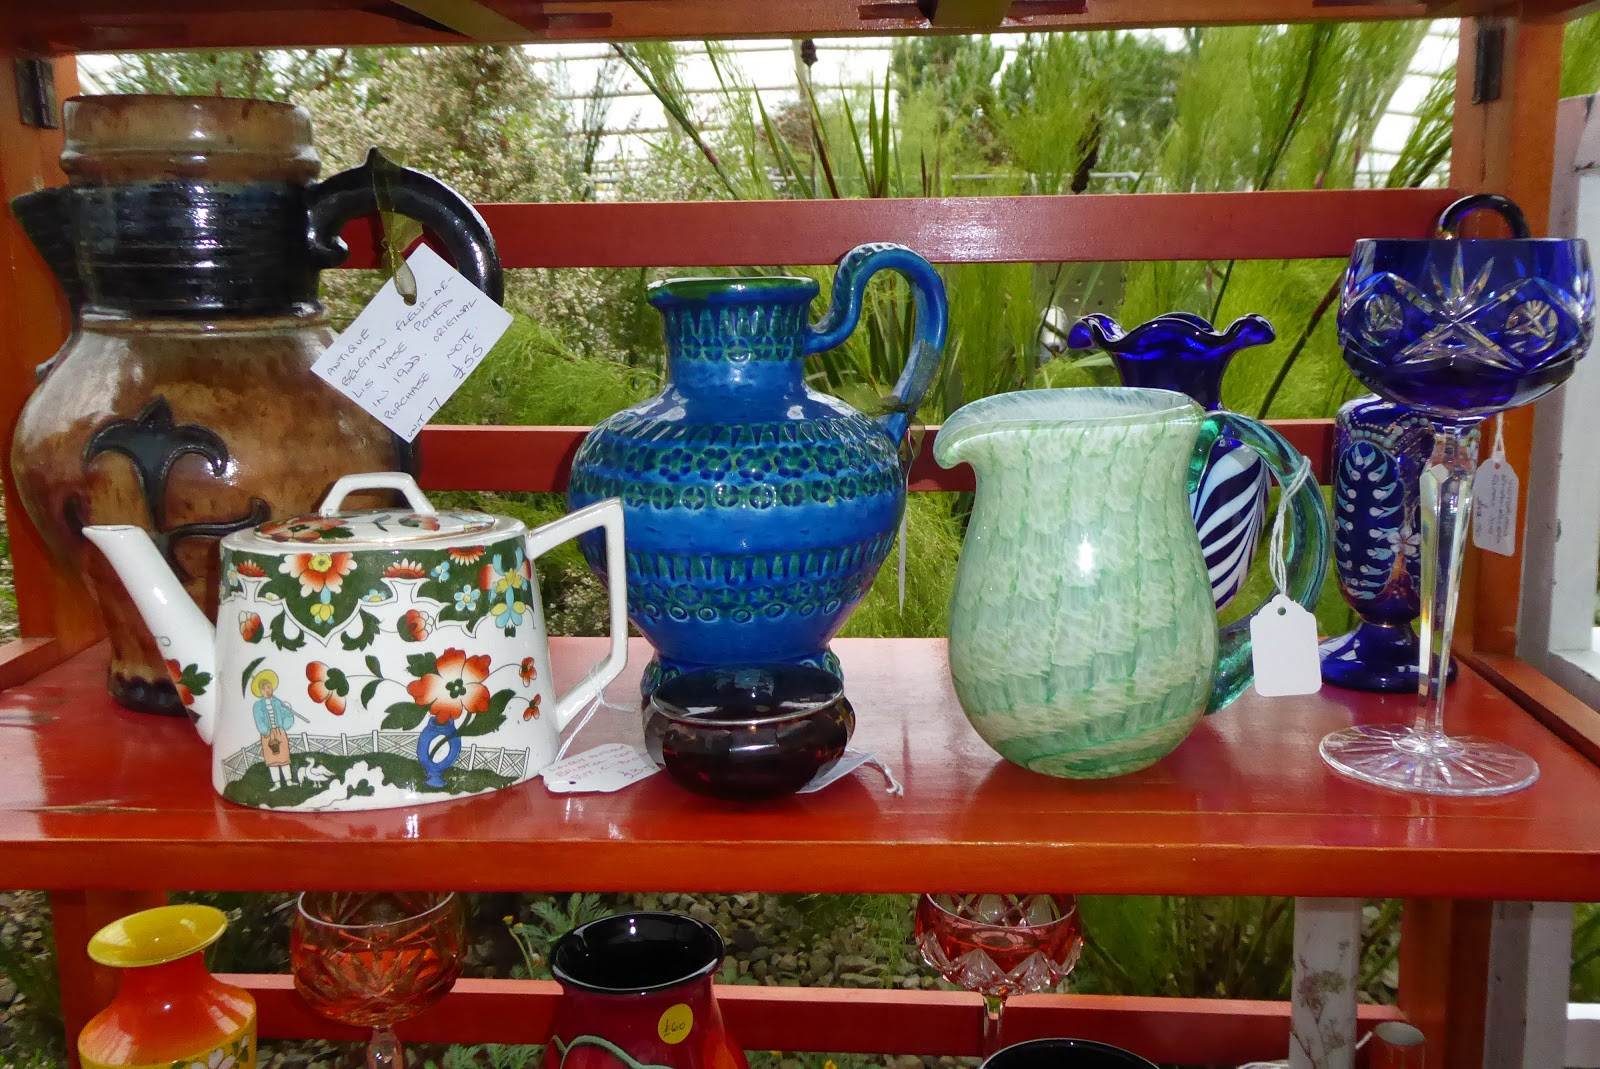 17 Nice Huge Vases for Sale 2024 free download huge vases for sale of codlinsandcream2 phew that was a tiring weekend with a big hefty fleur de lis jug from belgium includes sale docket dated 1922 bittori jug really heavy green glass jug